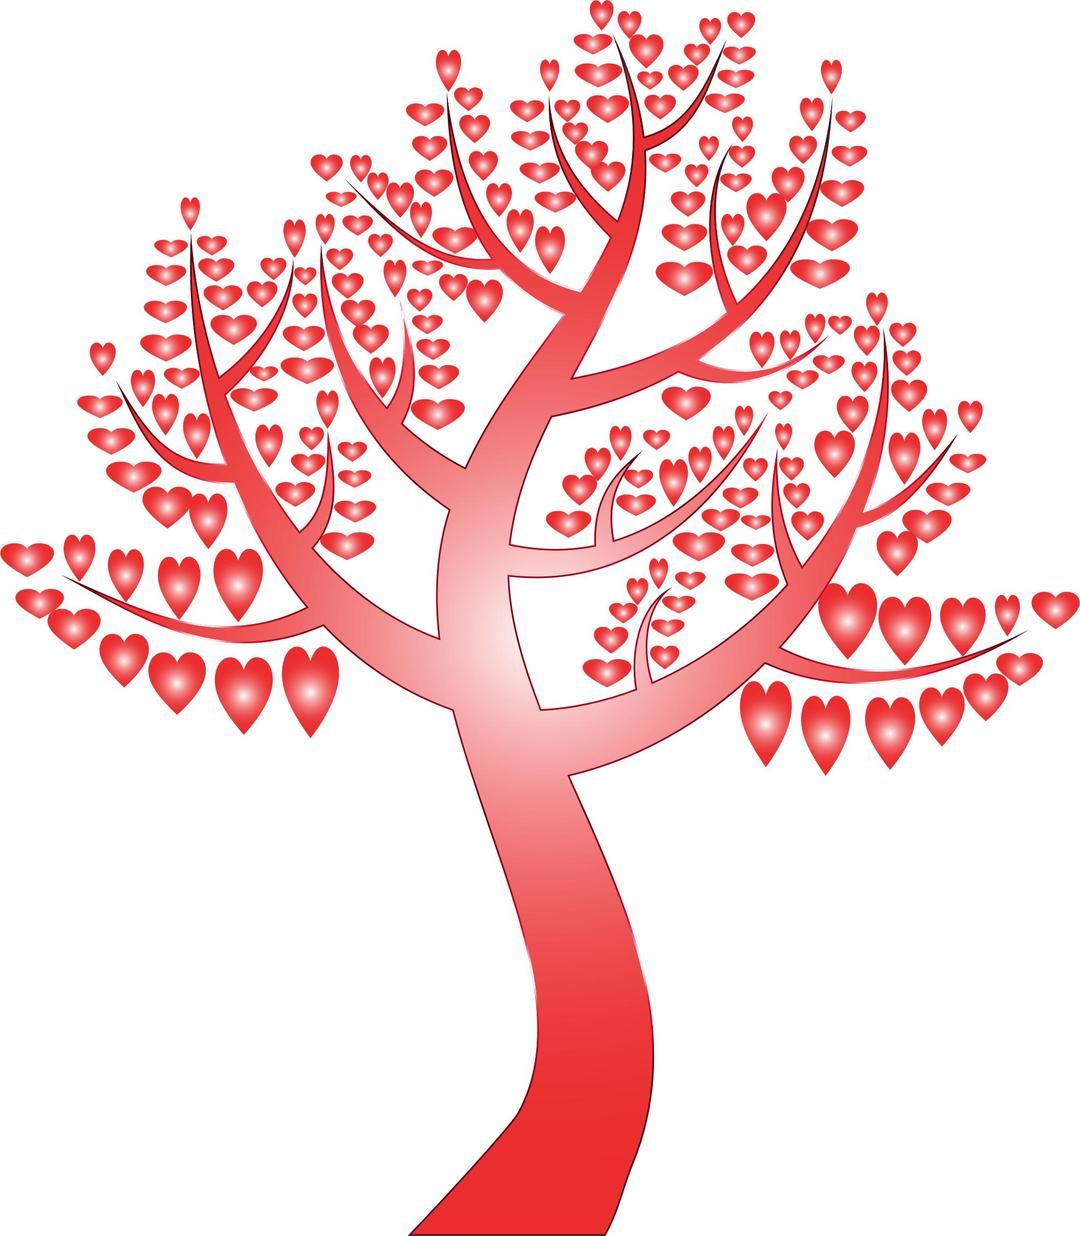 Simple Hearts Tree 12 No Background png transparent